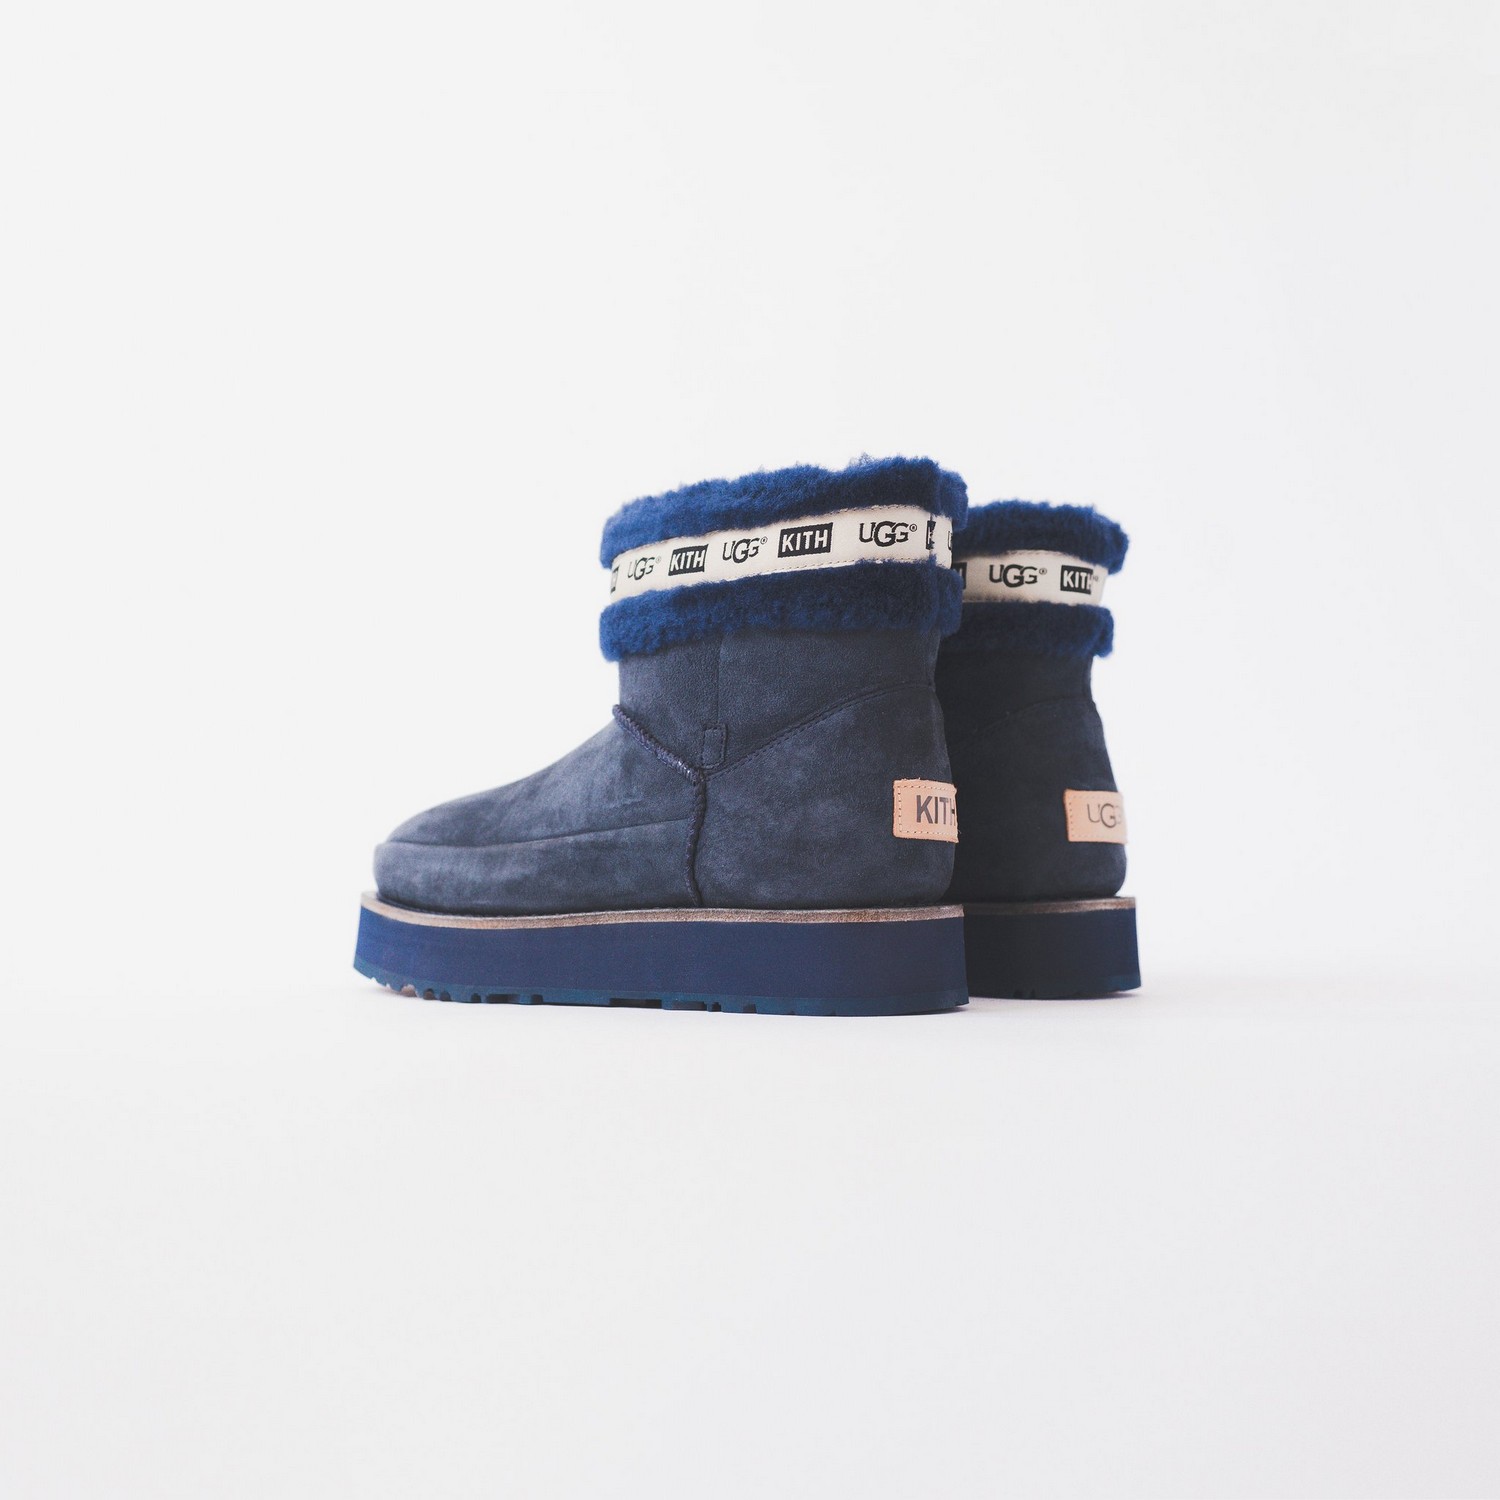 kith-women-ugg-boots-december-2018